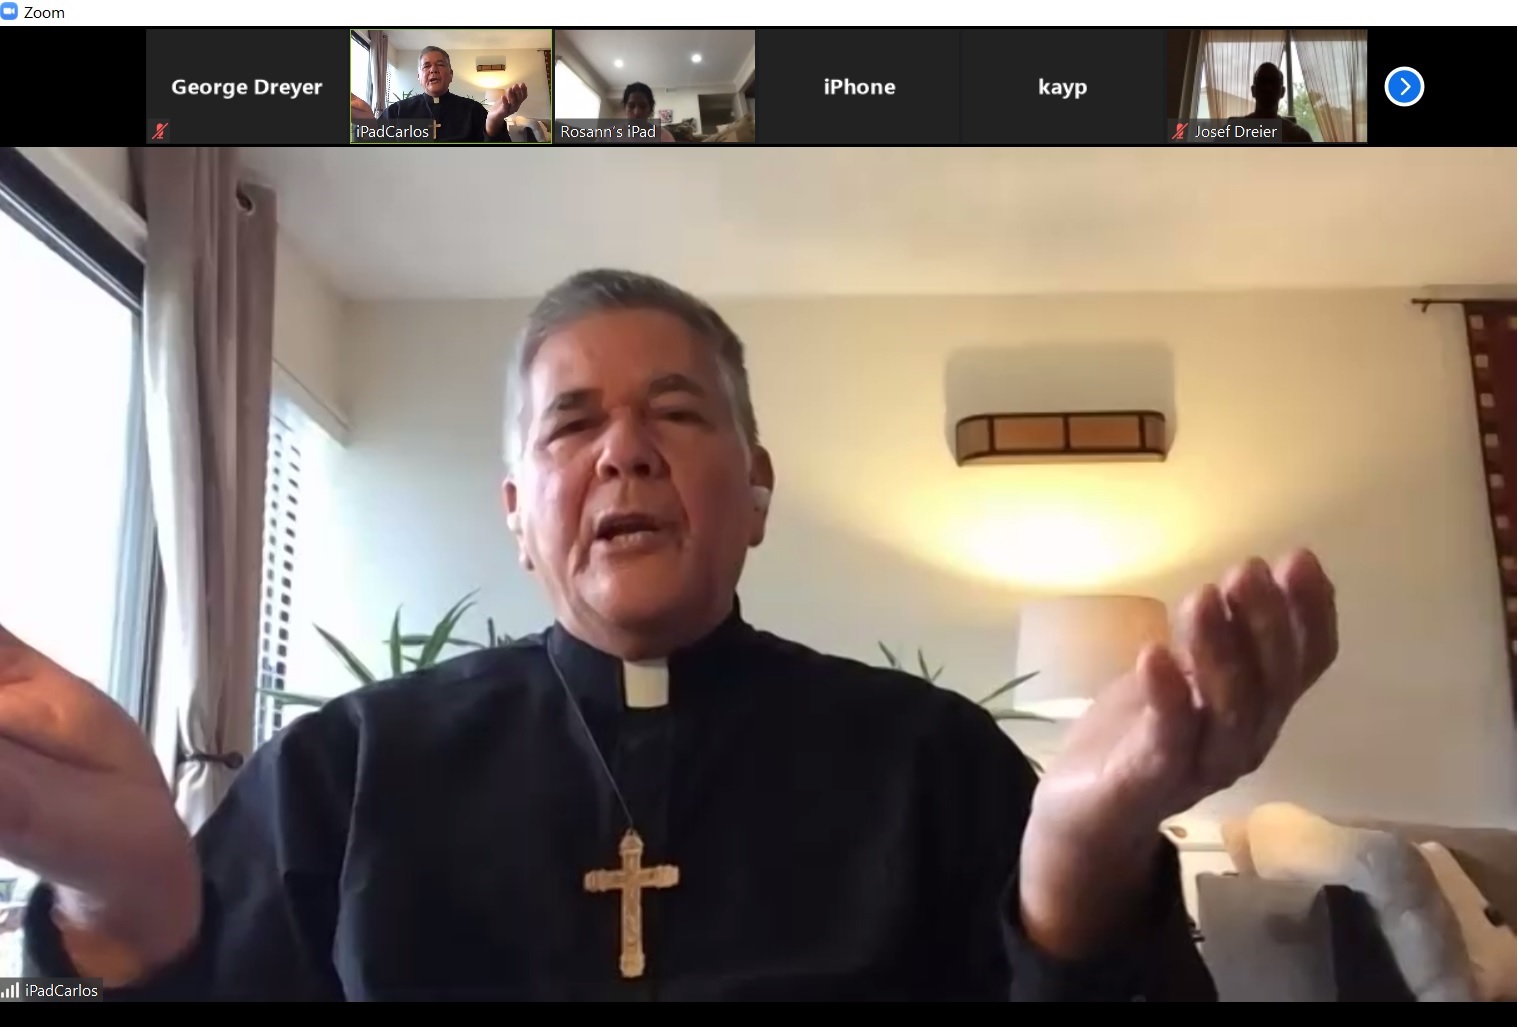 Father Carlos preaching at streamed service on Zoom